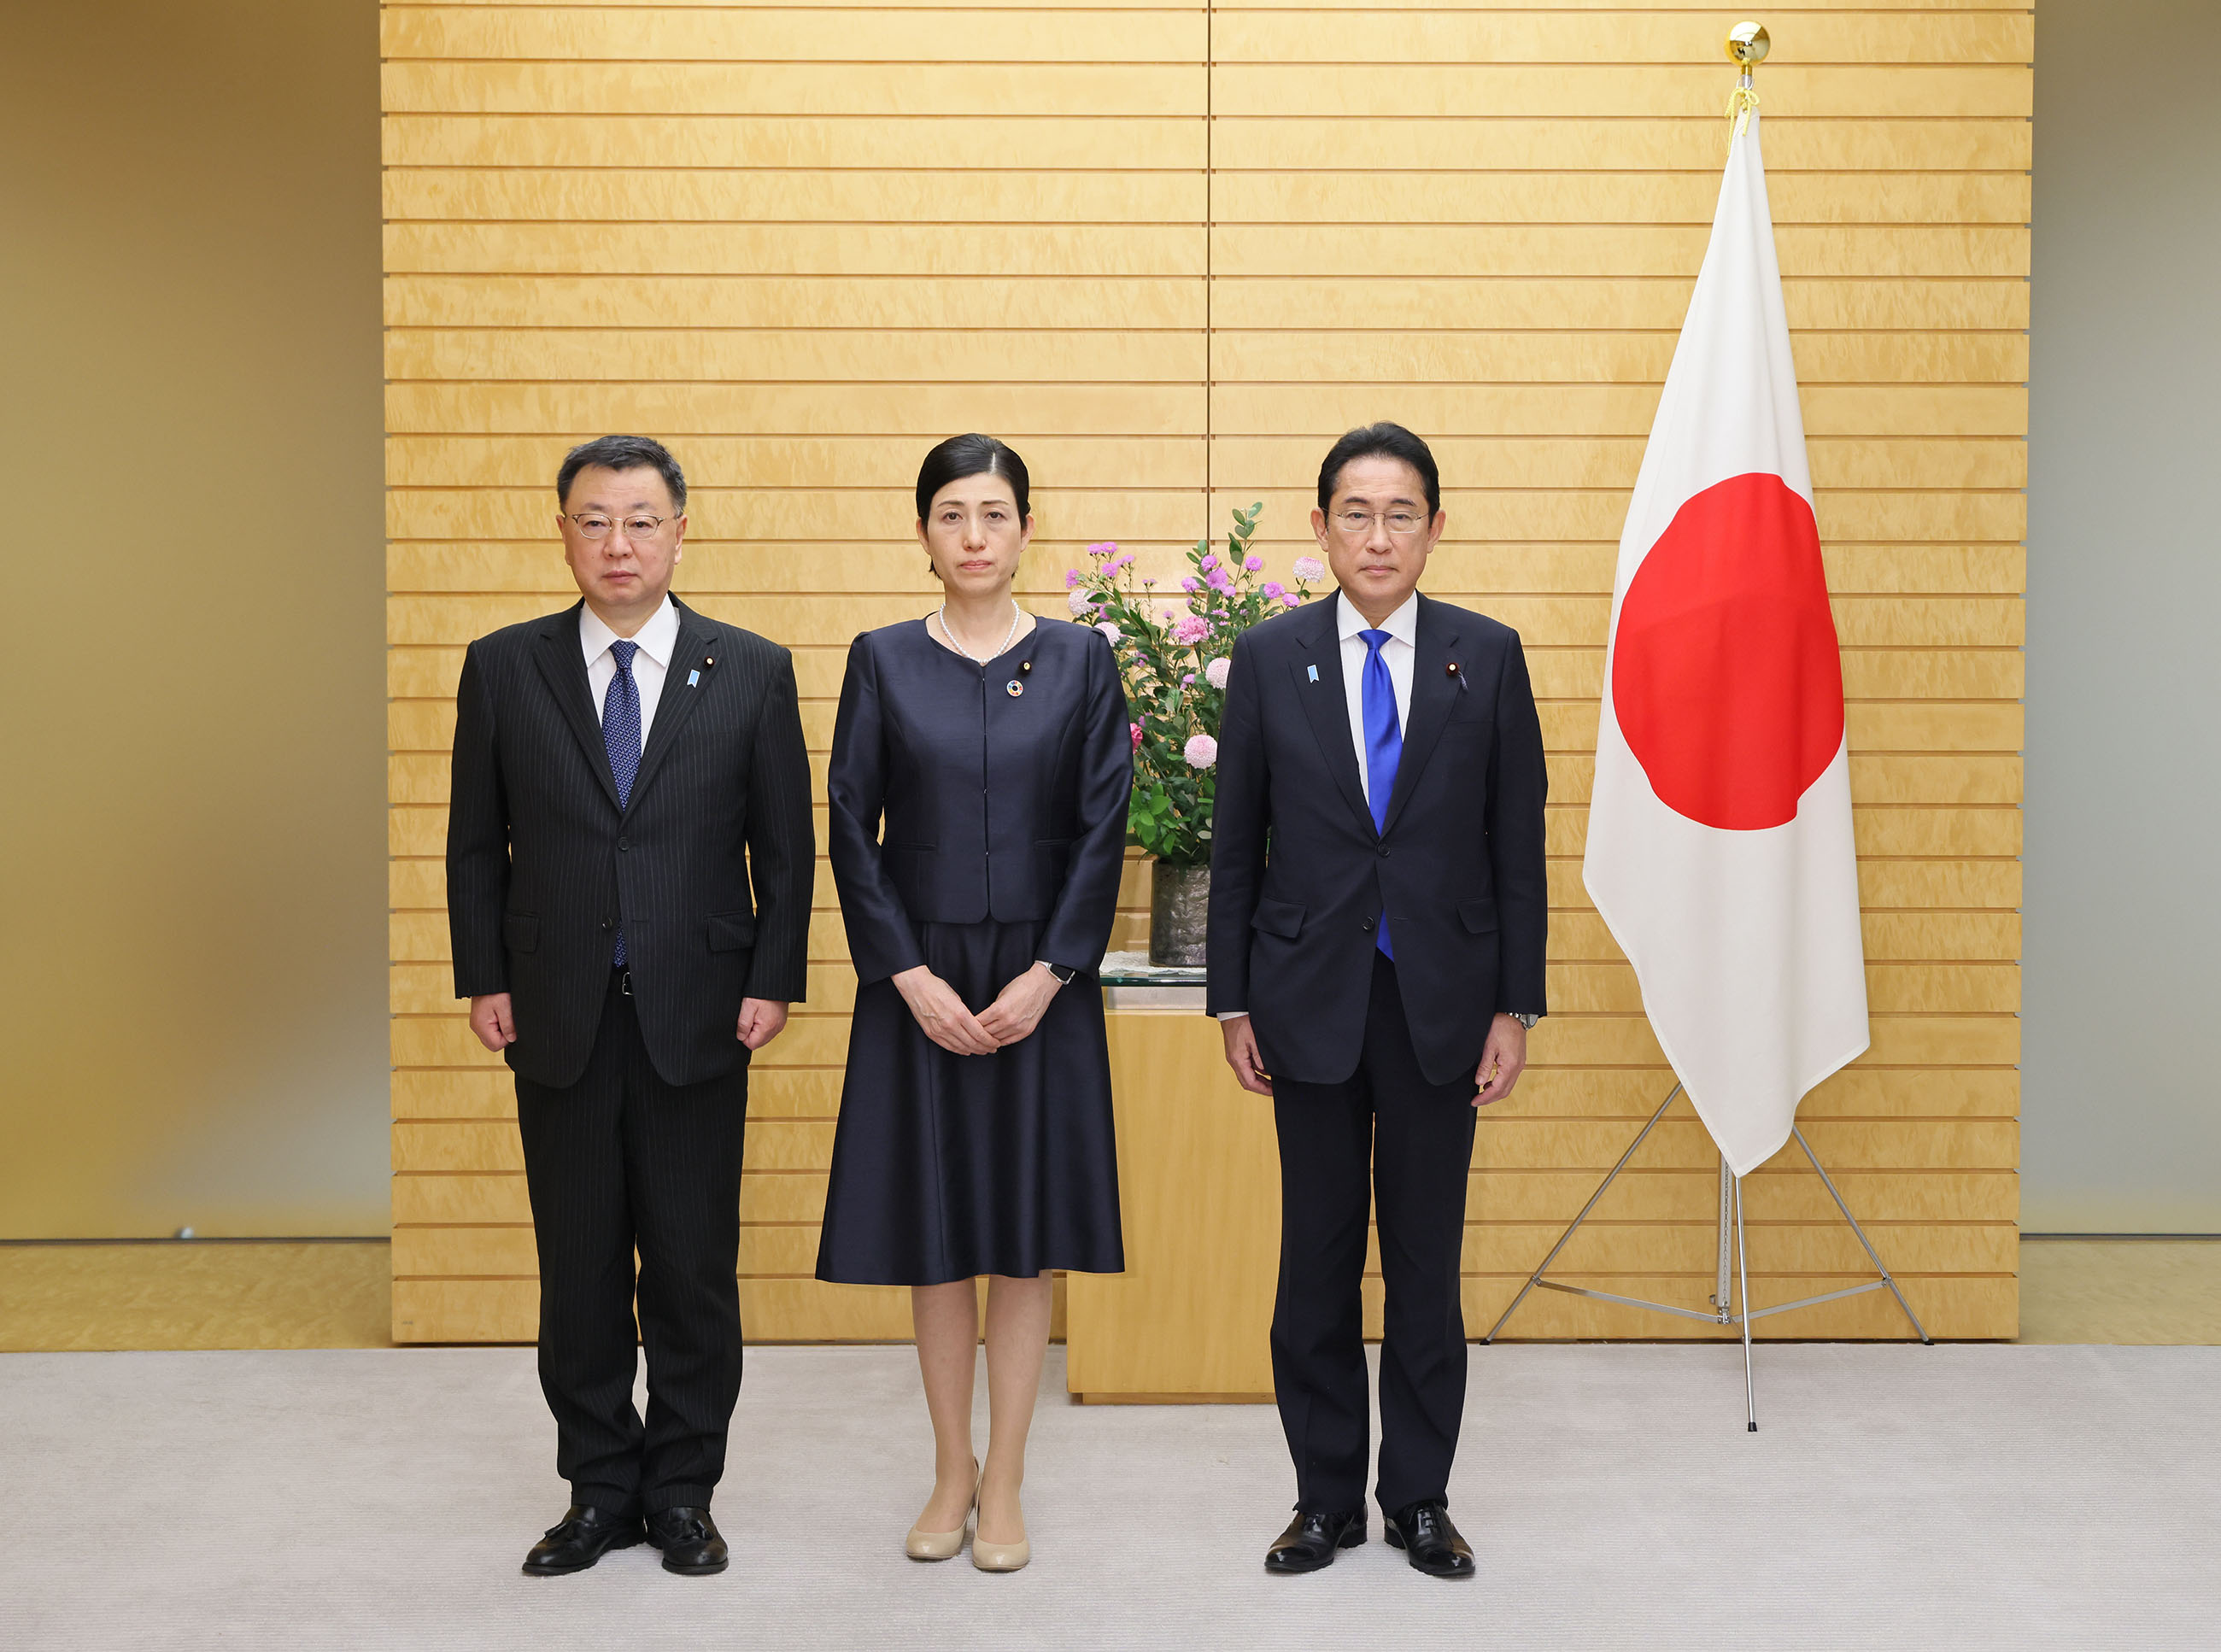 Prime Minister Kishida attending a photograph session with Parliamentary Vice-Minister Honda (3)